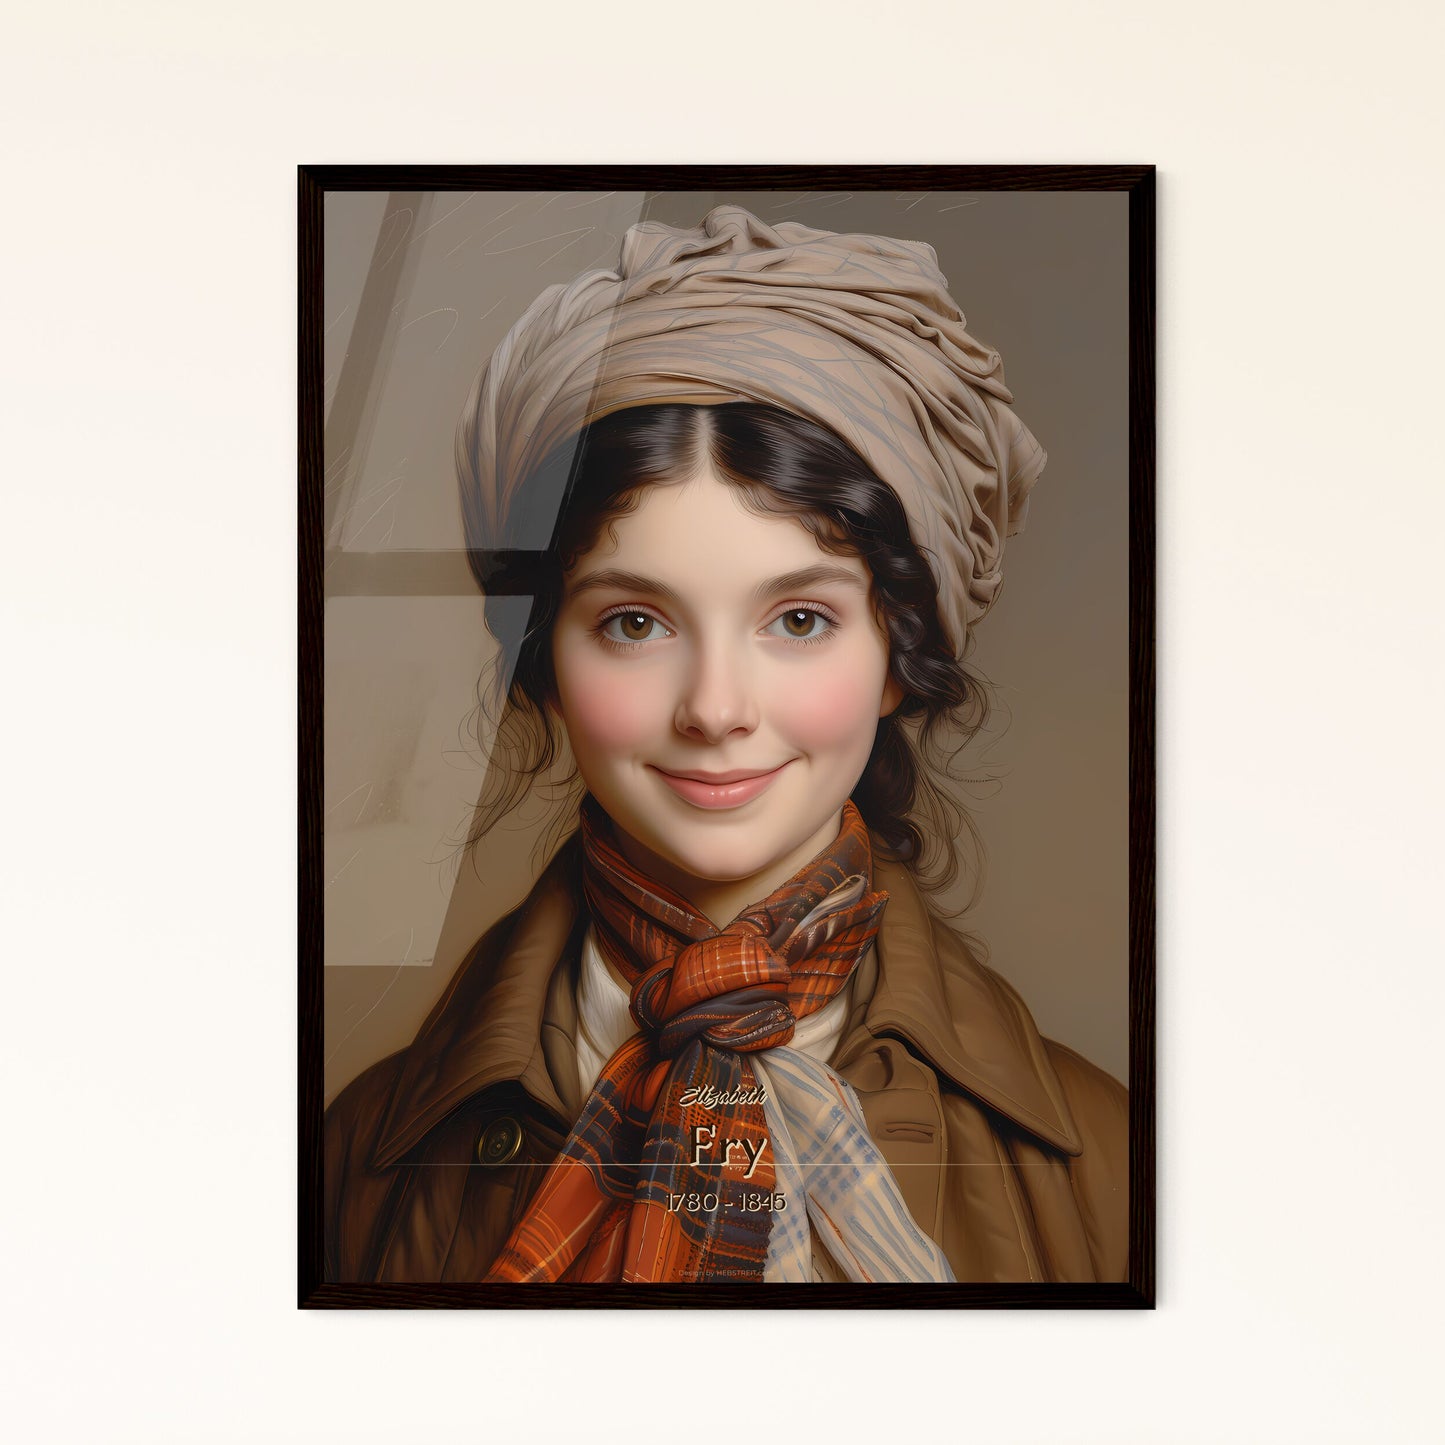 Elizabeth, Fry, 1780 - 1845, A Poster of a woman with a scarf on her head Default Title